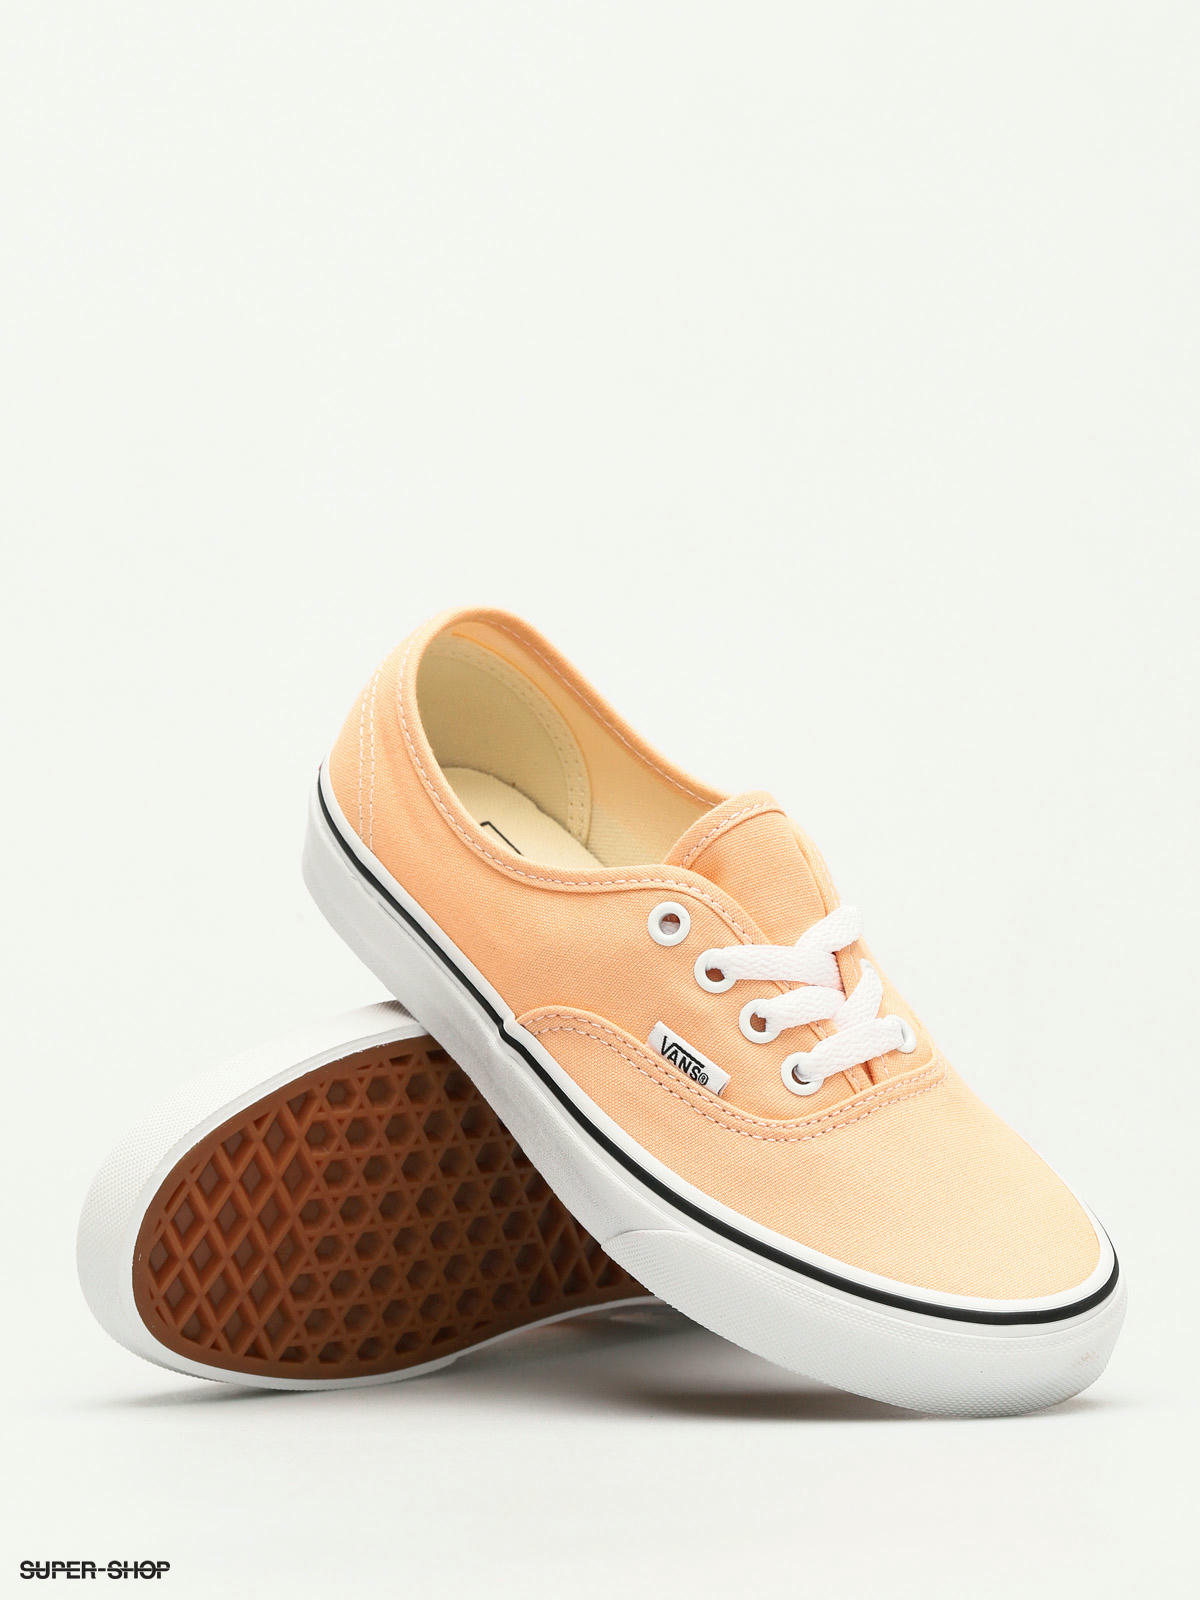 bleached apricot checkered vans